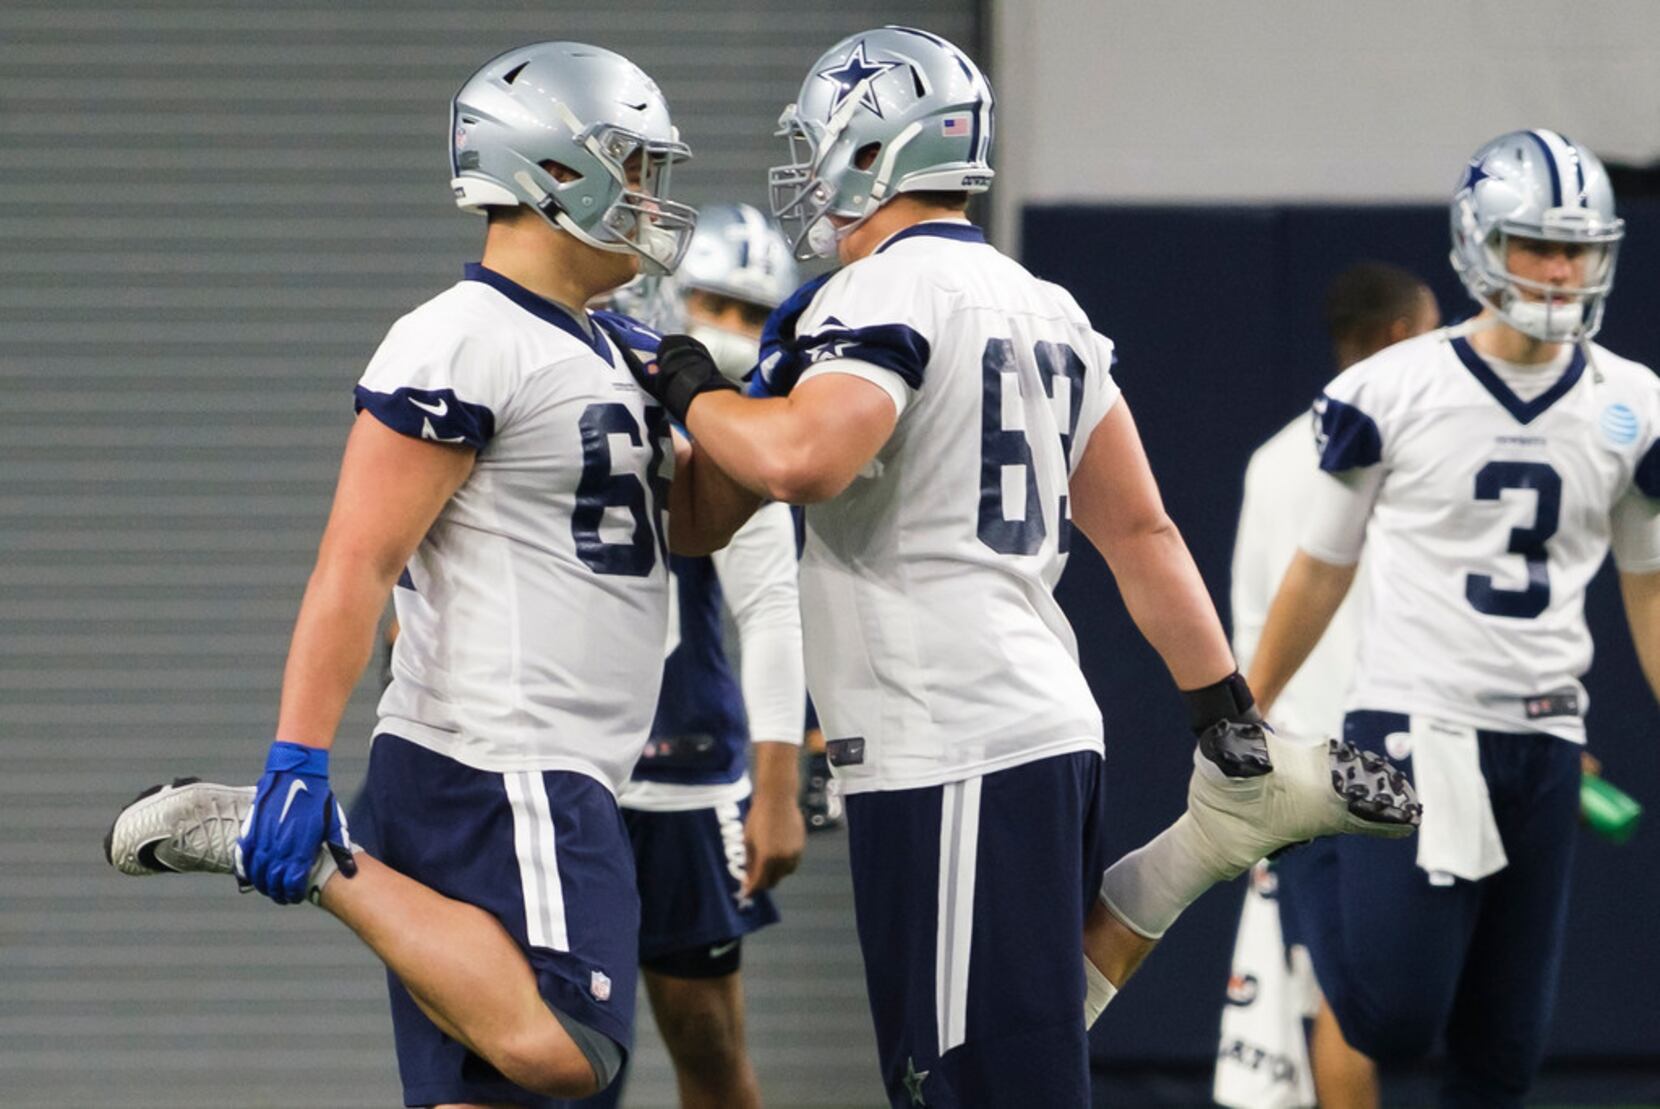 Sources: Cowboys rookie Connor McGovern suffers setback in recovery from  pectoral injury, putting season in jeopardy